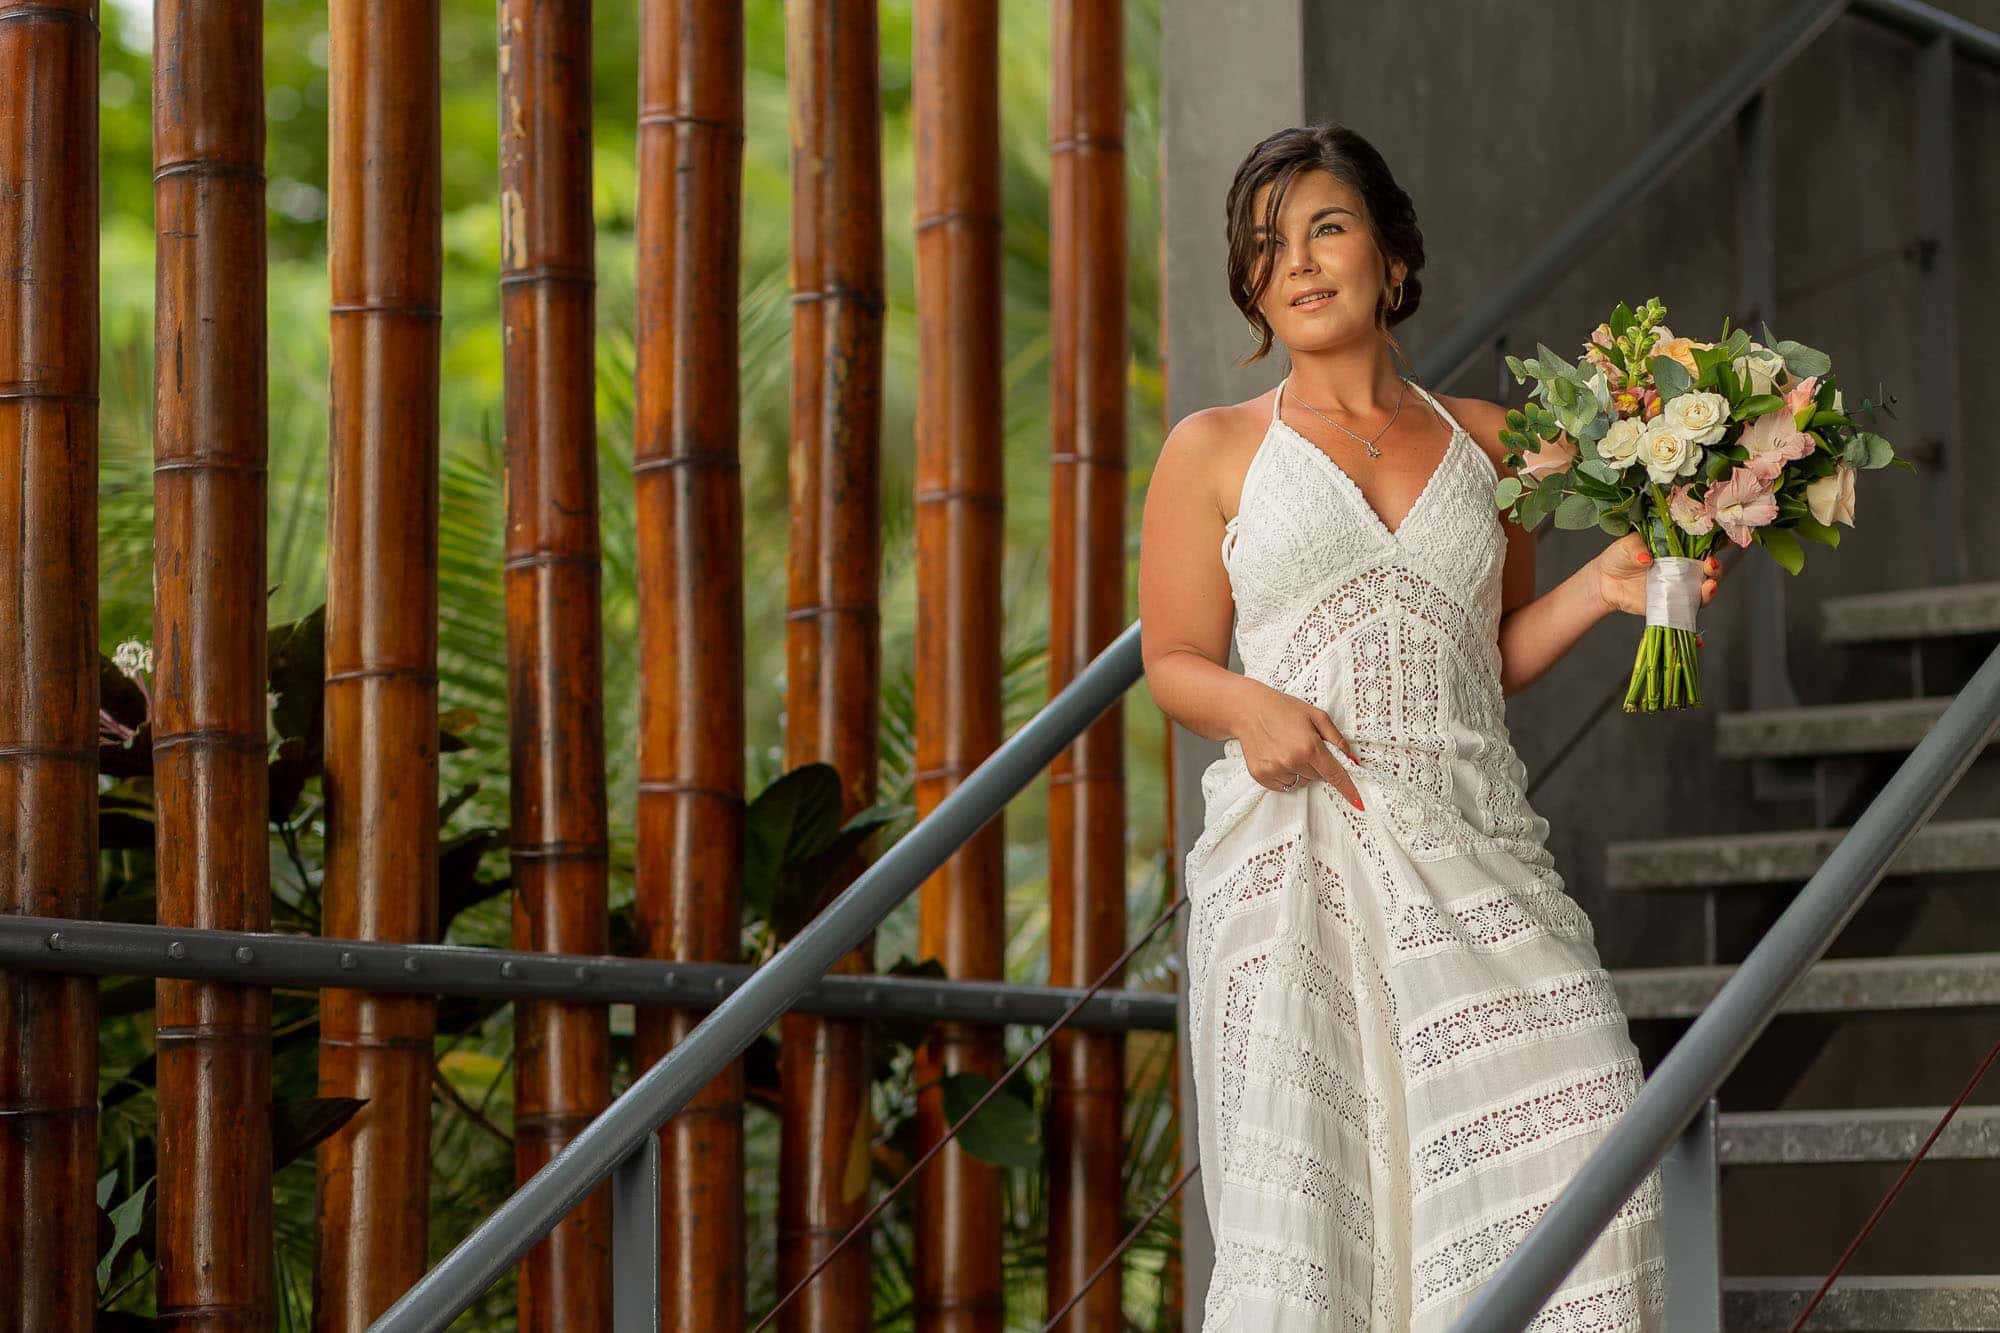 The bride descends the stairs on her way to her surprise wedding